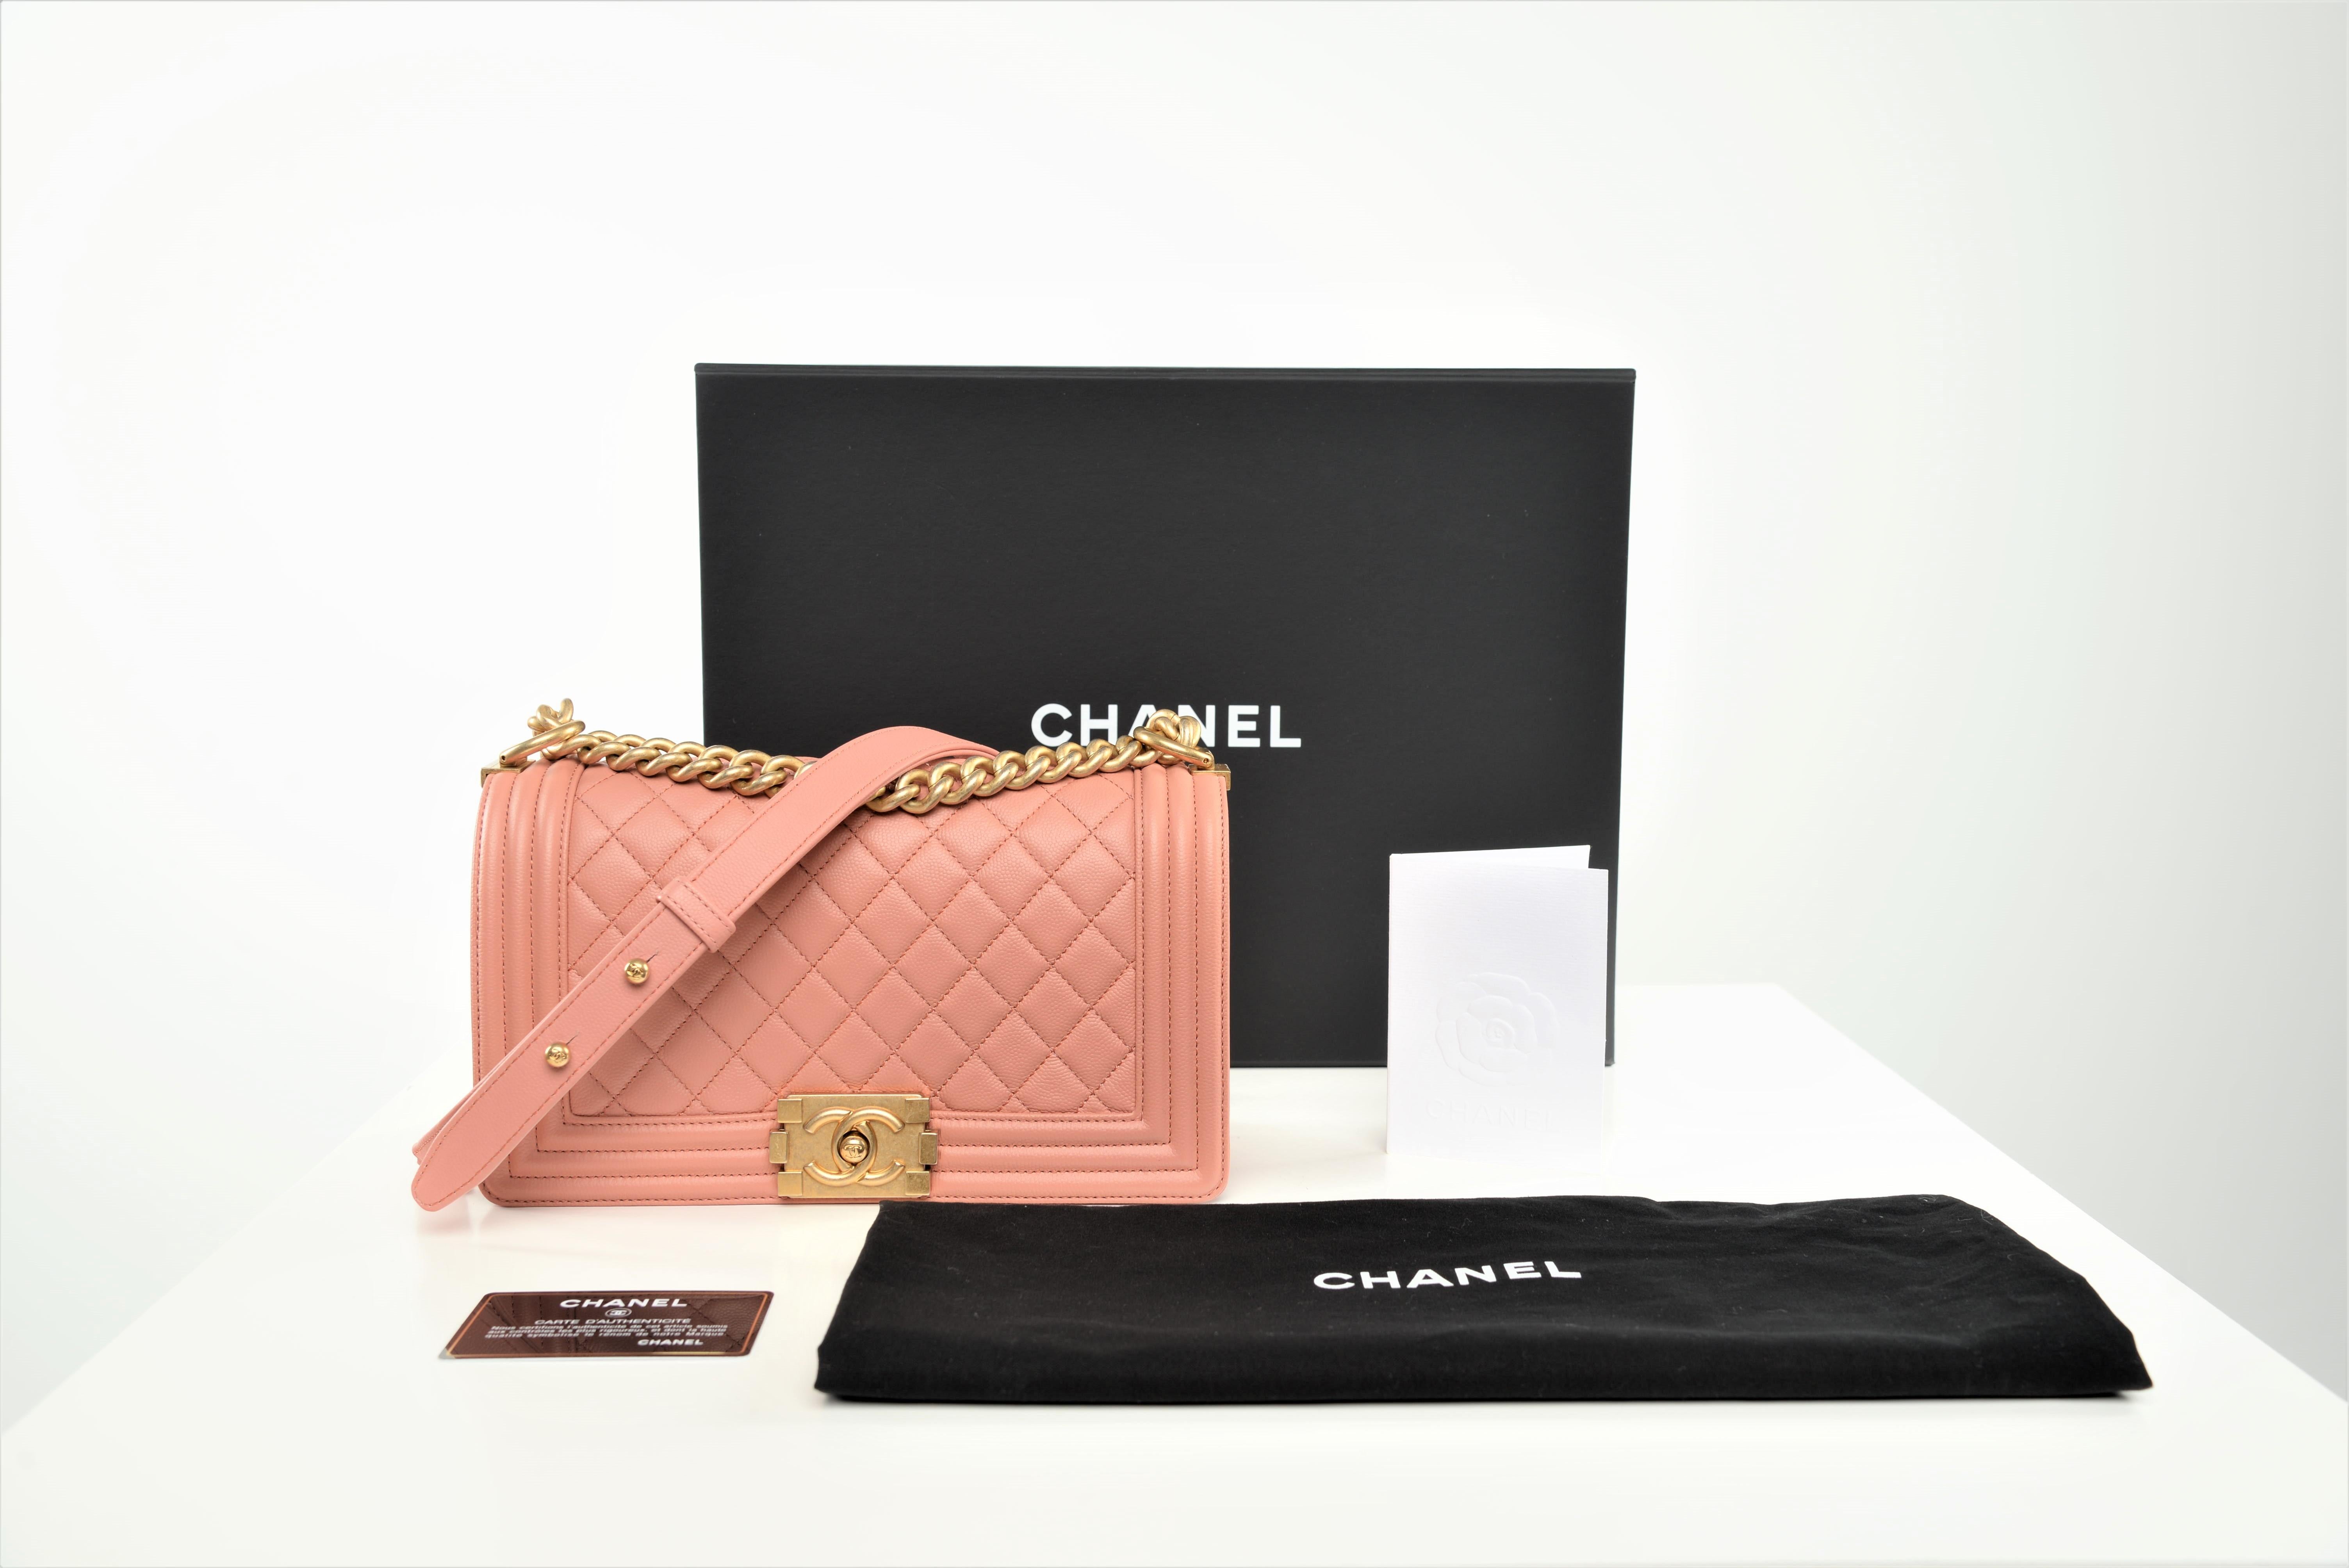 From the collection of SAVINETI we offer this Chanel Boy Bag Medium:

- Brand: Chanel
- Model: Boy Bag Medium
- Year: 2017
- Code: 24358643
- Condition: Excellent 
- Materials: Lambskin Leather, gold-tone hardware 
- Extras: Full-Set (hologram,